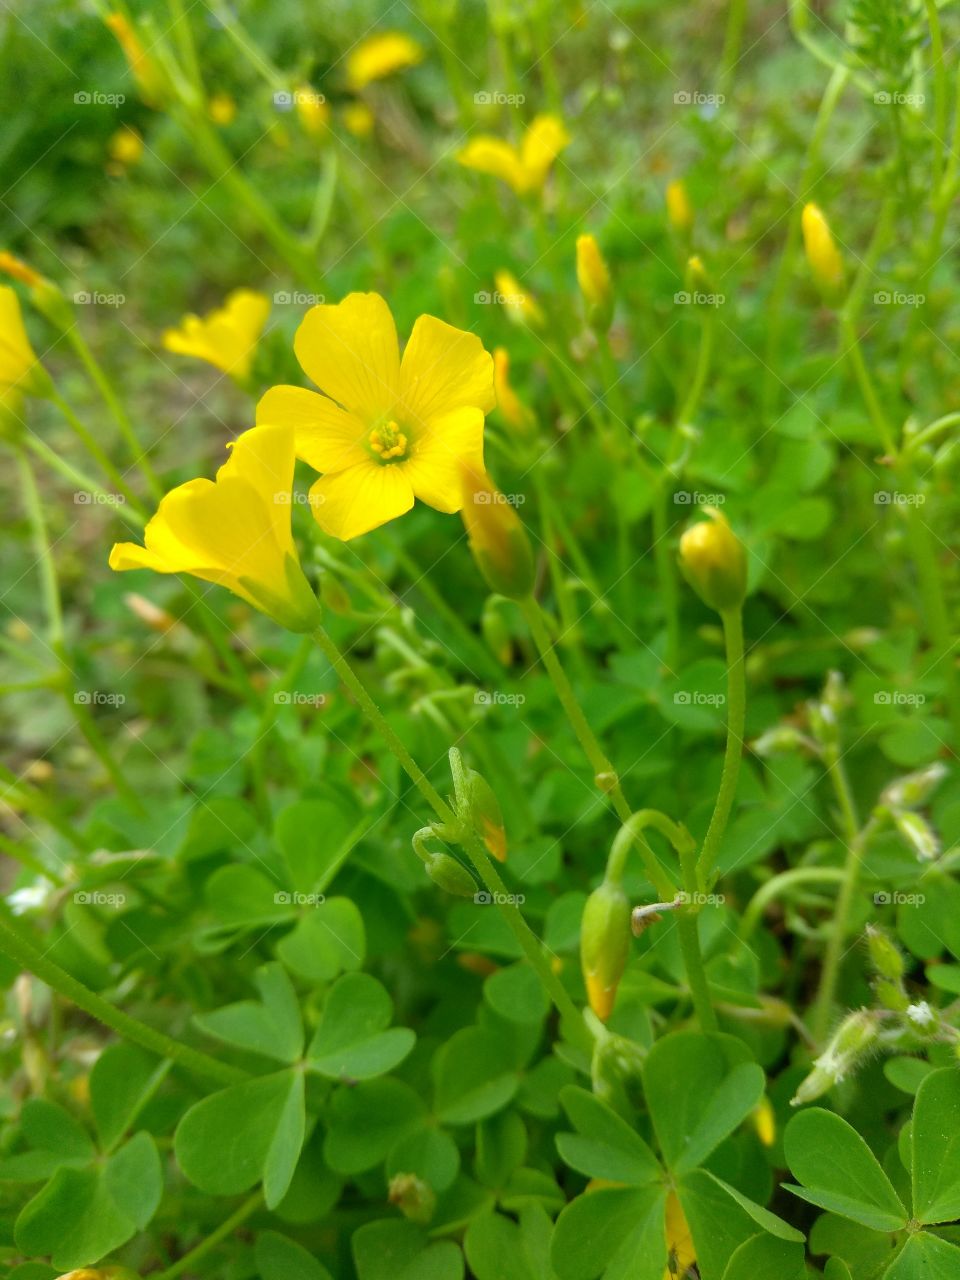 stunning little yellow flowers atop of a bed of clovers